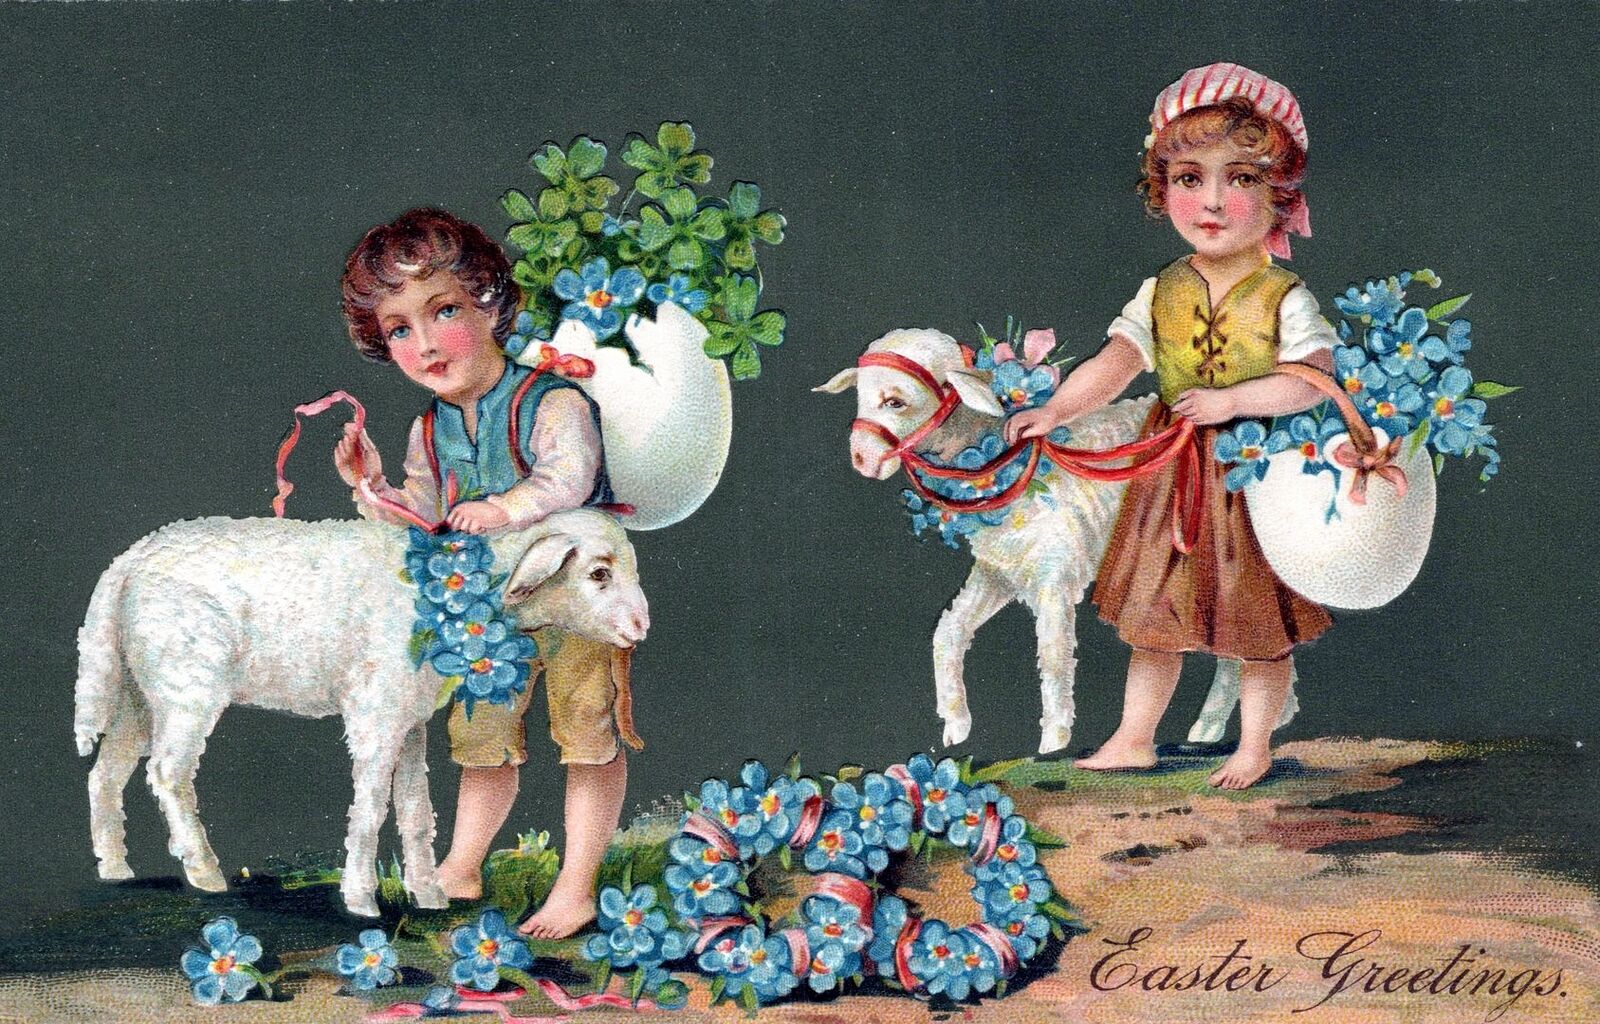 EASTER - Children And Leashed Lambs Easter Greetings PFB Postcard